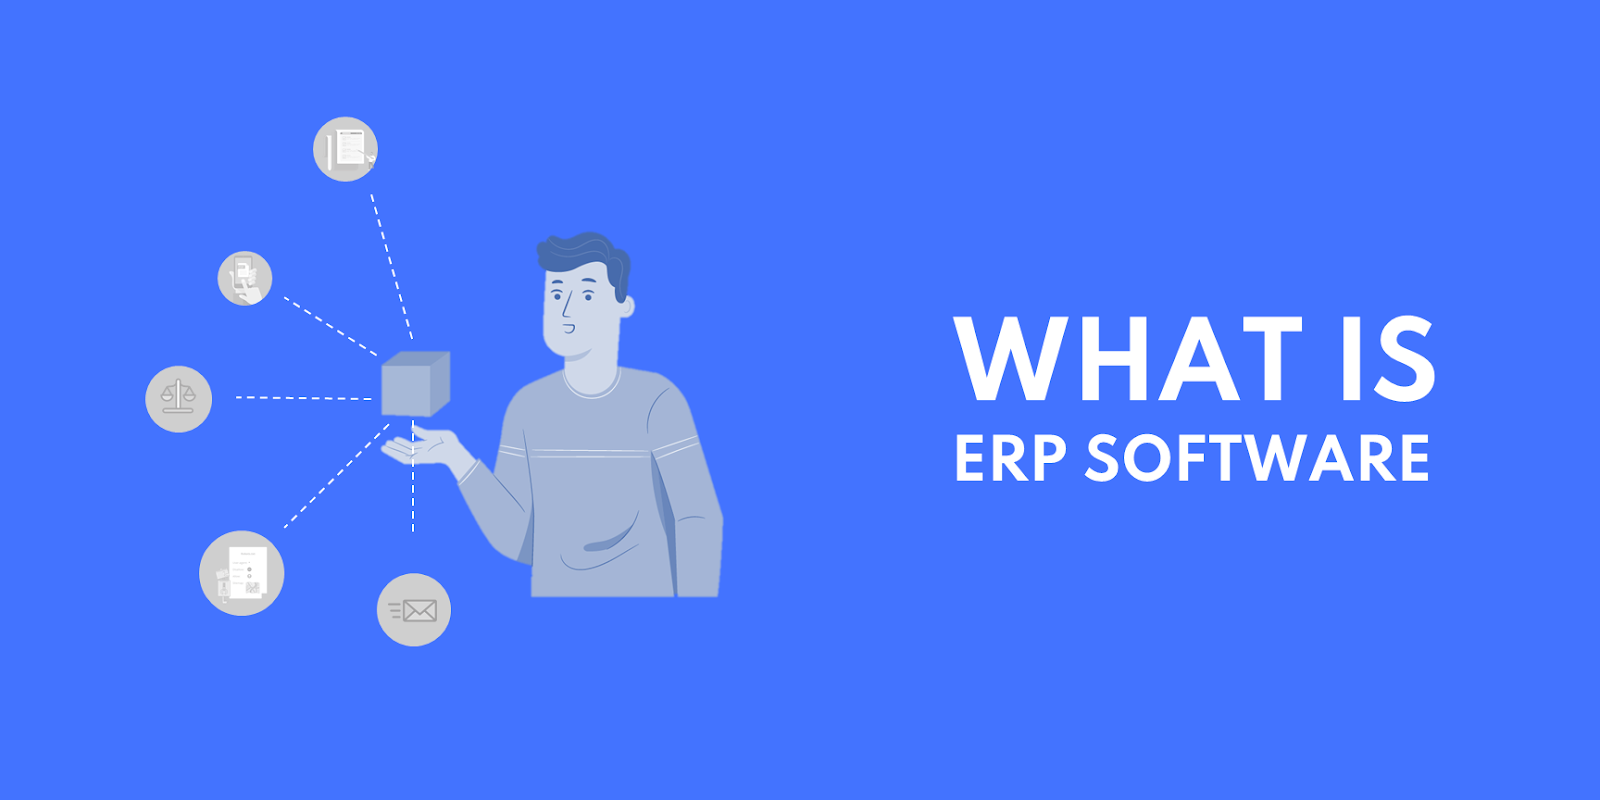 Erp implementation in manufacturing industry